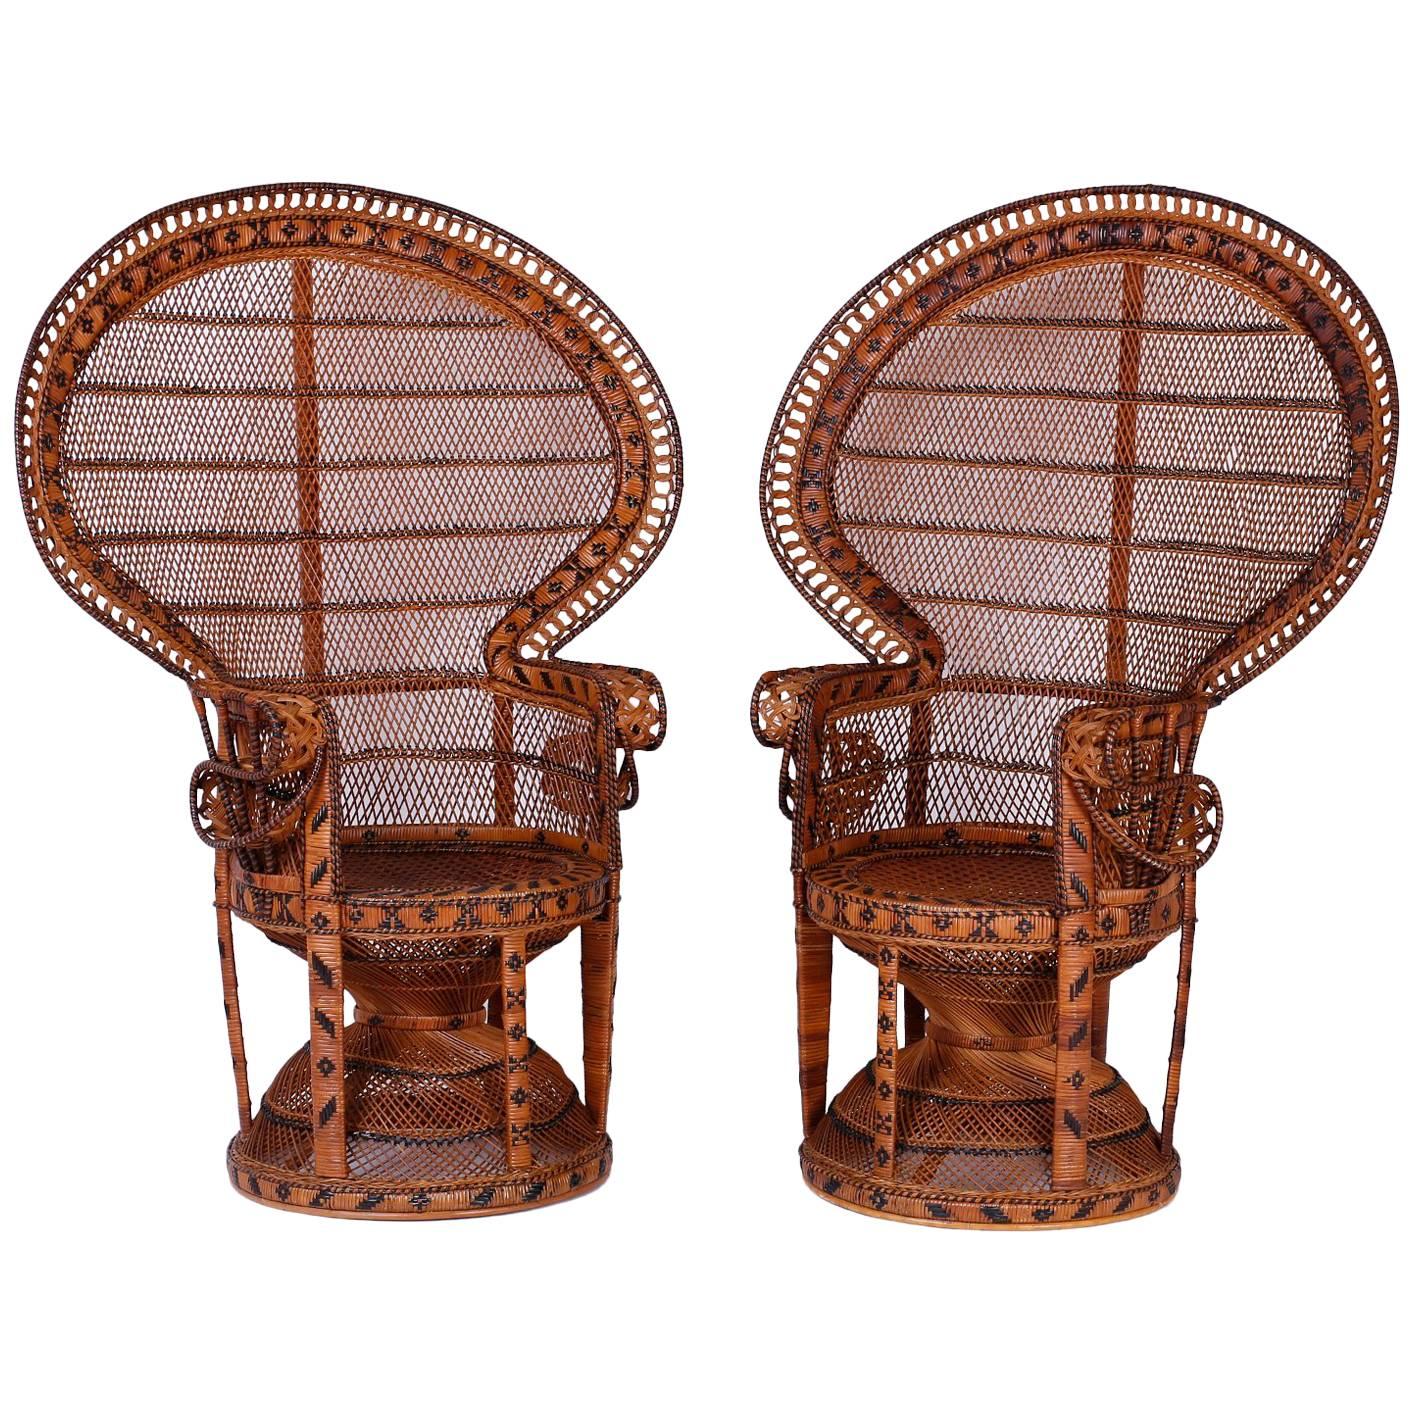 Pair of Mid-Century Asian Peacock Chairs